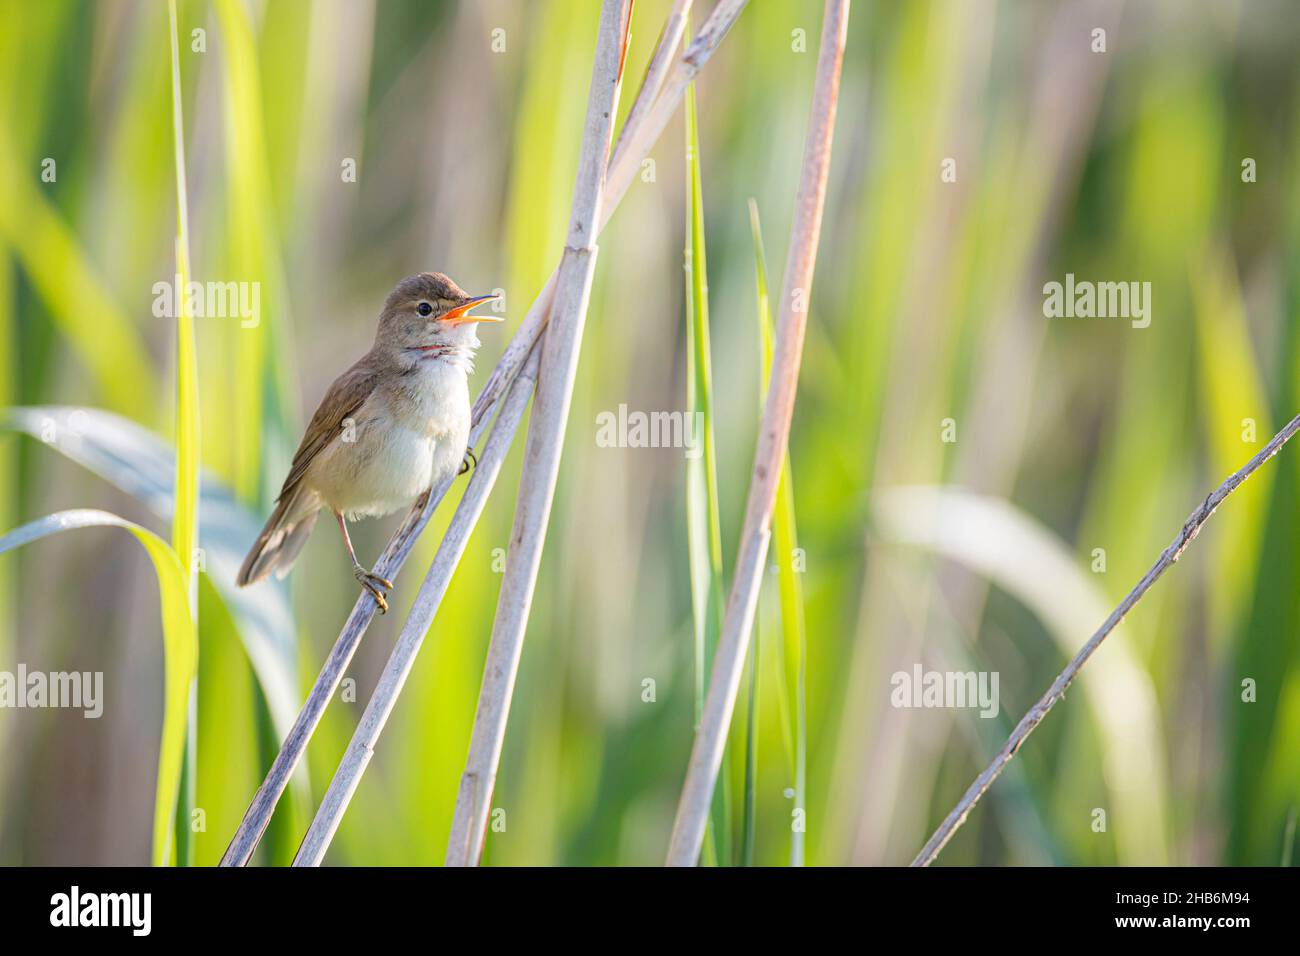 reed warbler (Acrocephalus scirpaceus), sings on a blade of reed, Germany, Bavaria Stock Photo